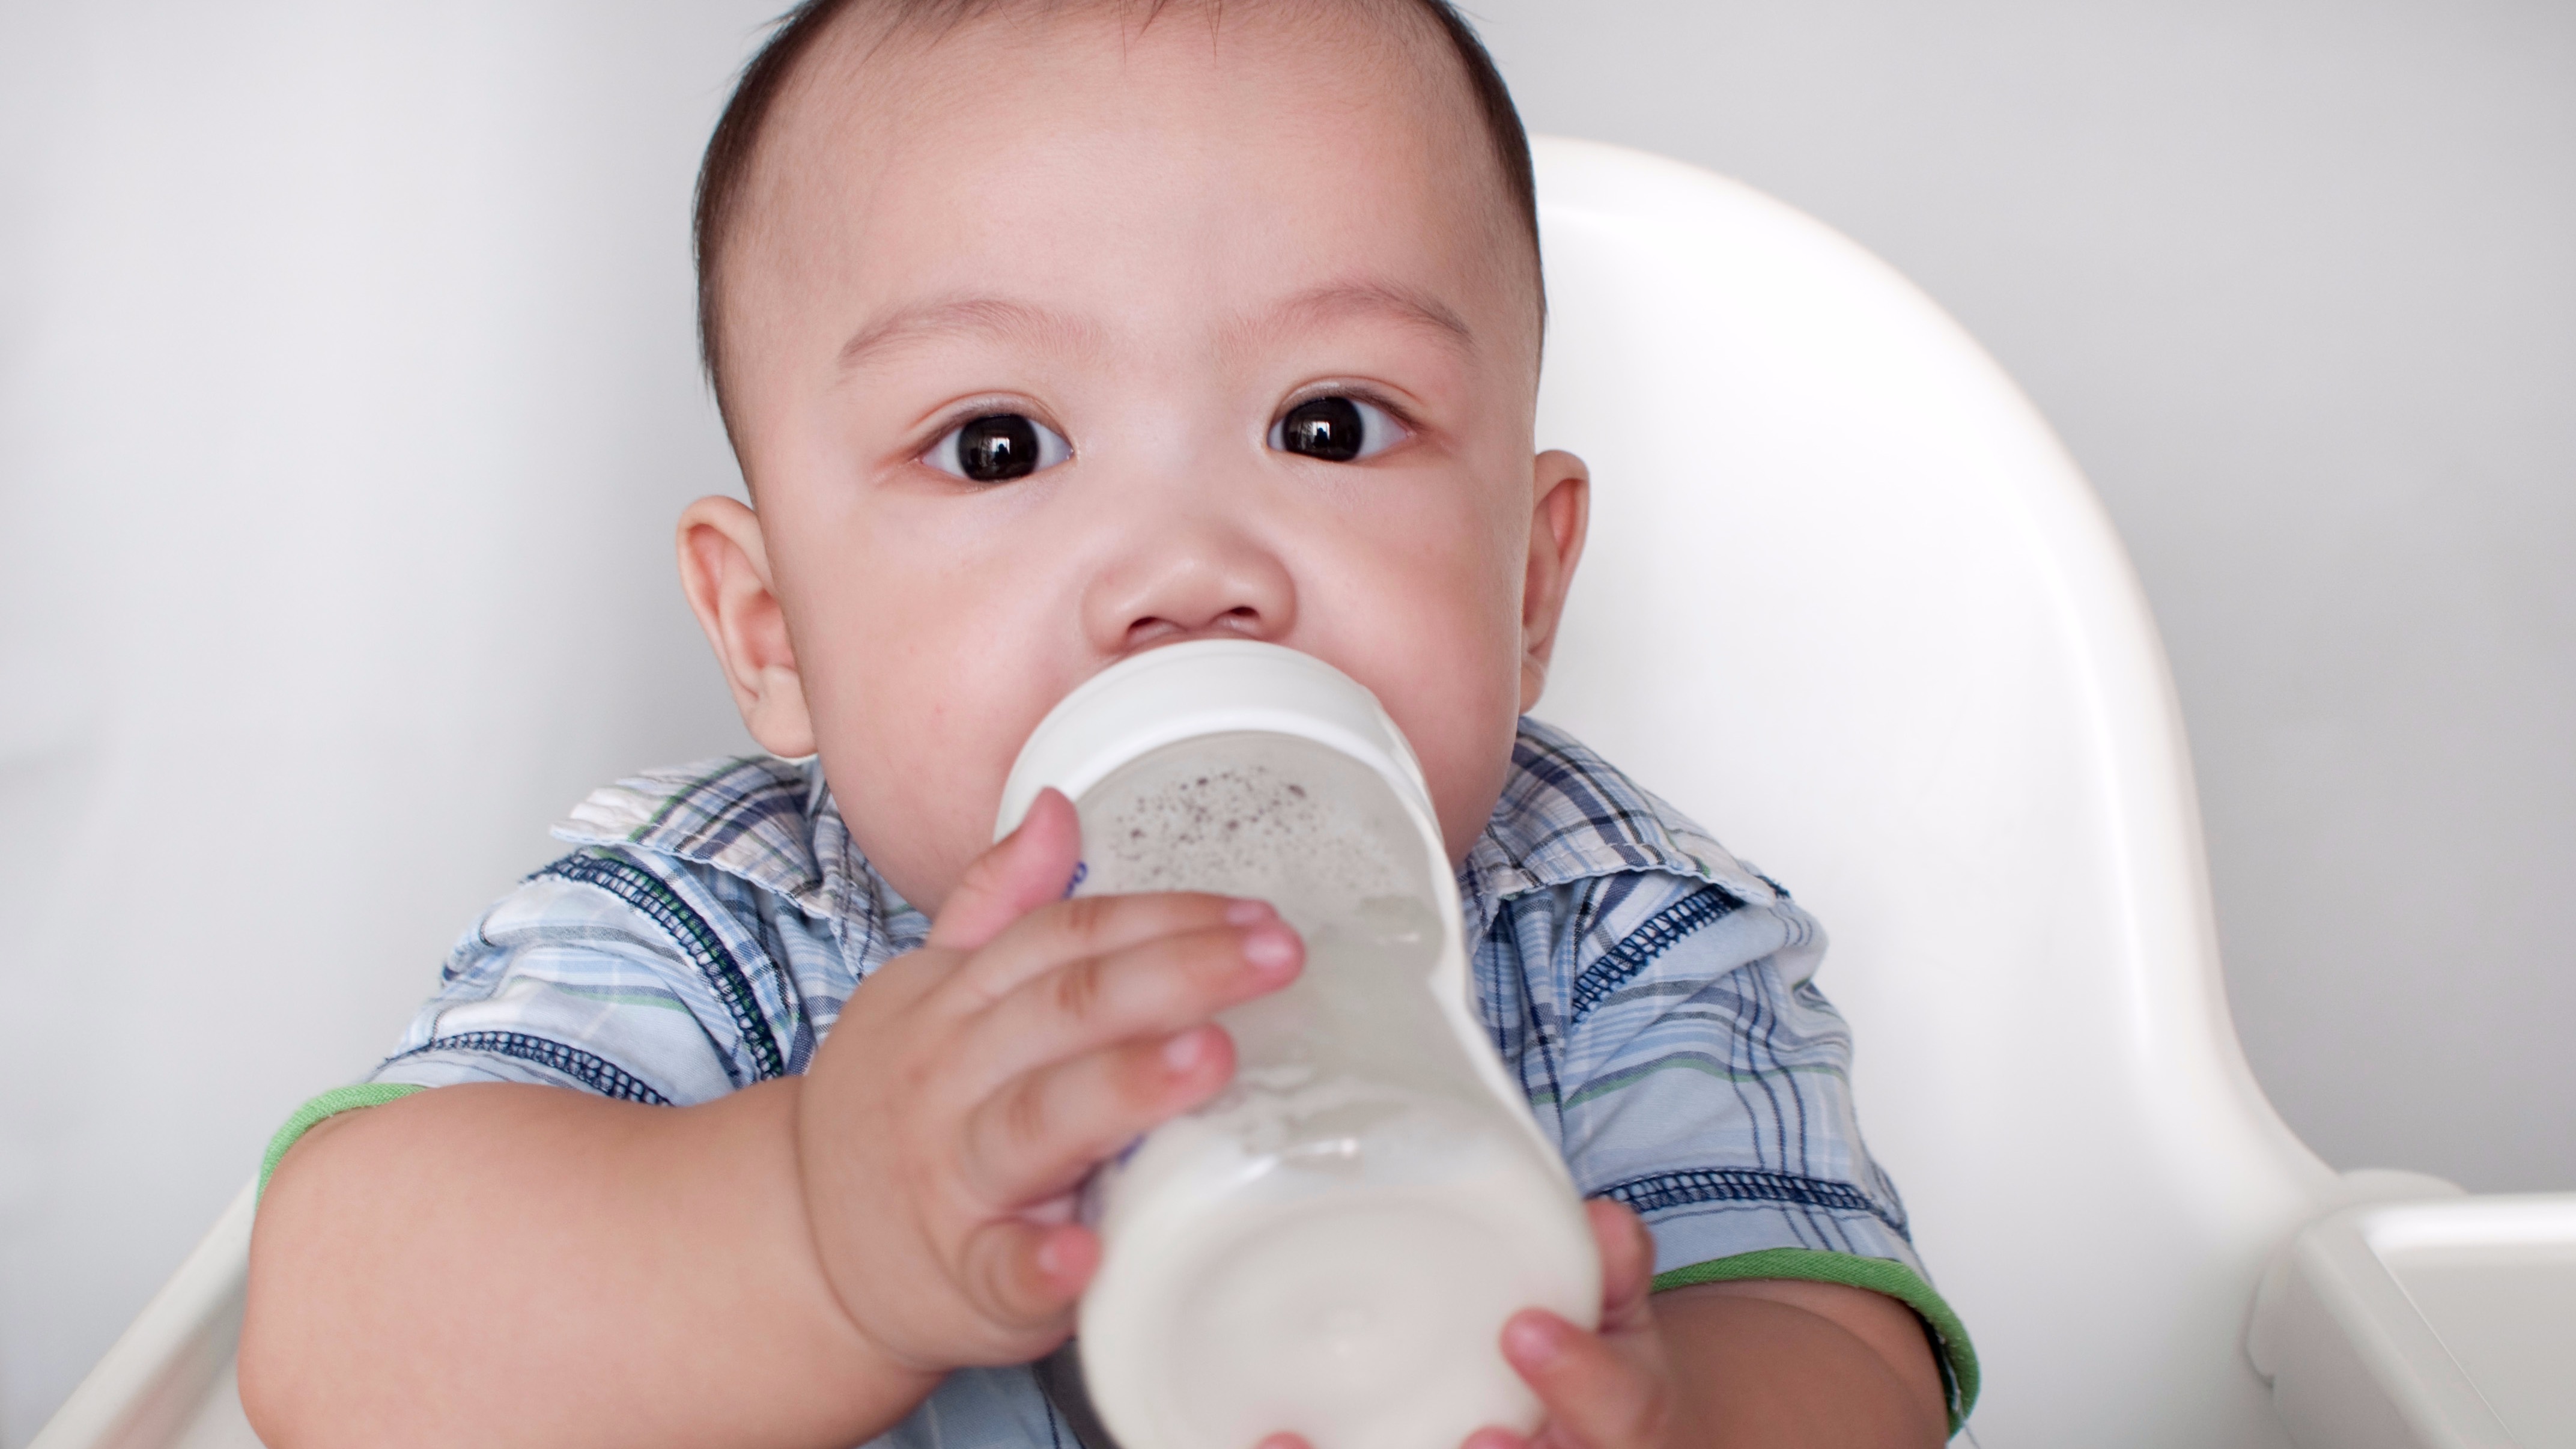 how to switch my baby from breastmilk to formula